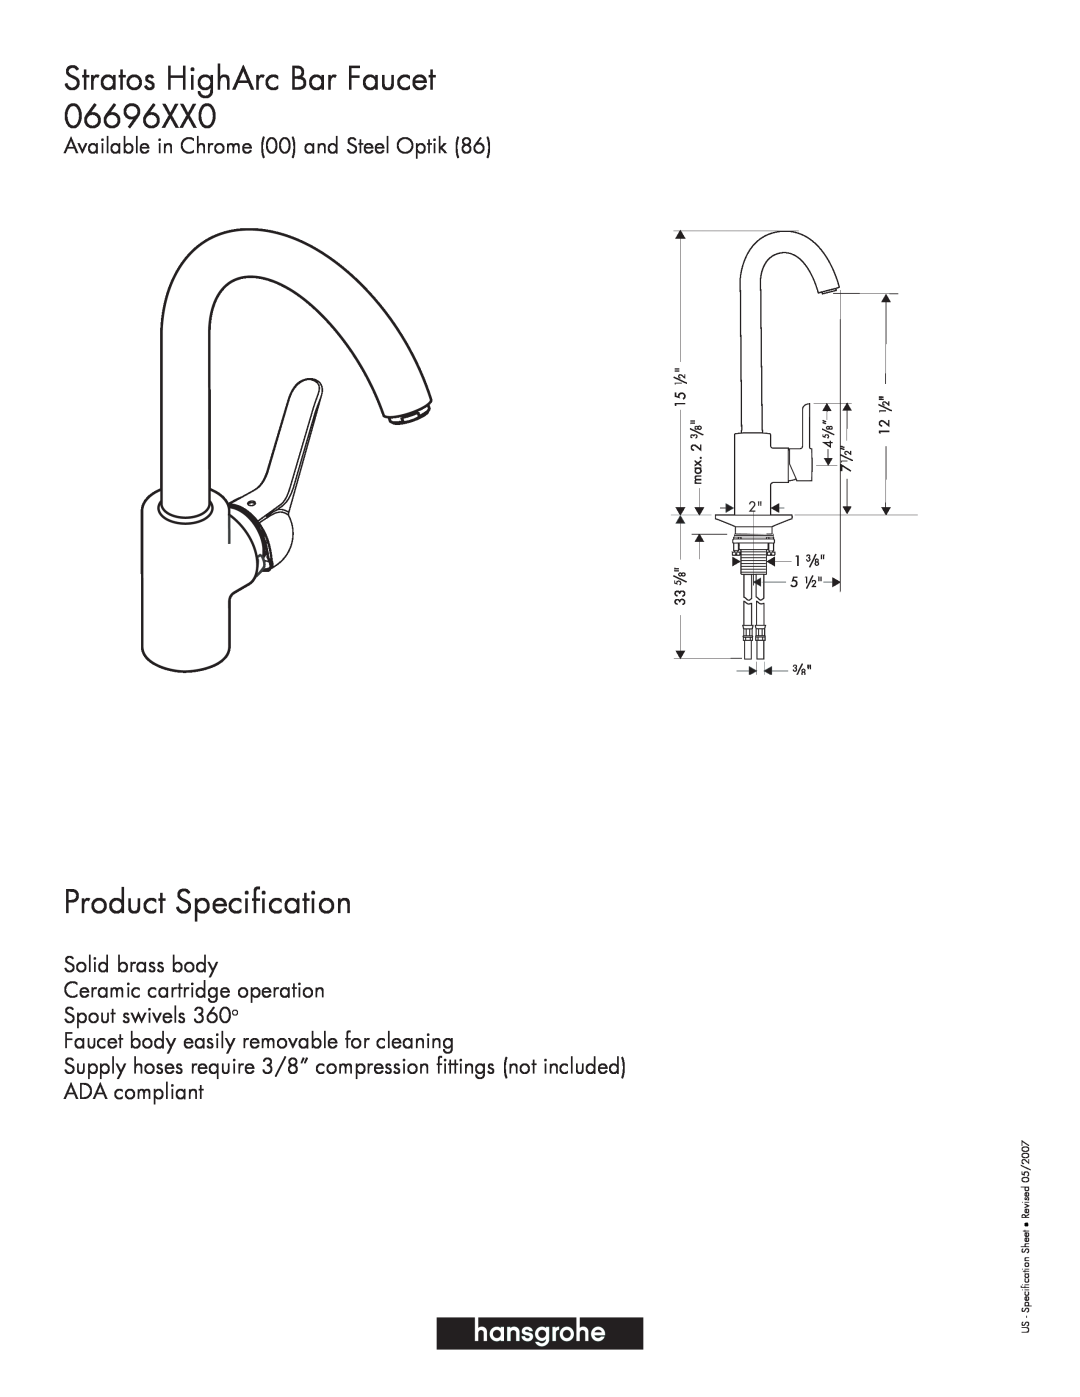 Axor 06696XX0 specifications Stratos HighArc Bar Faucet, Product Specification, Available in Chrome 00 and Steel Optik 